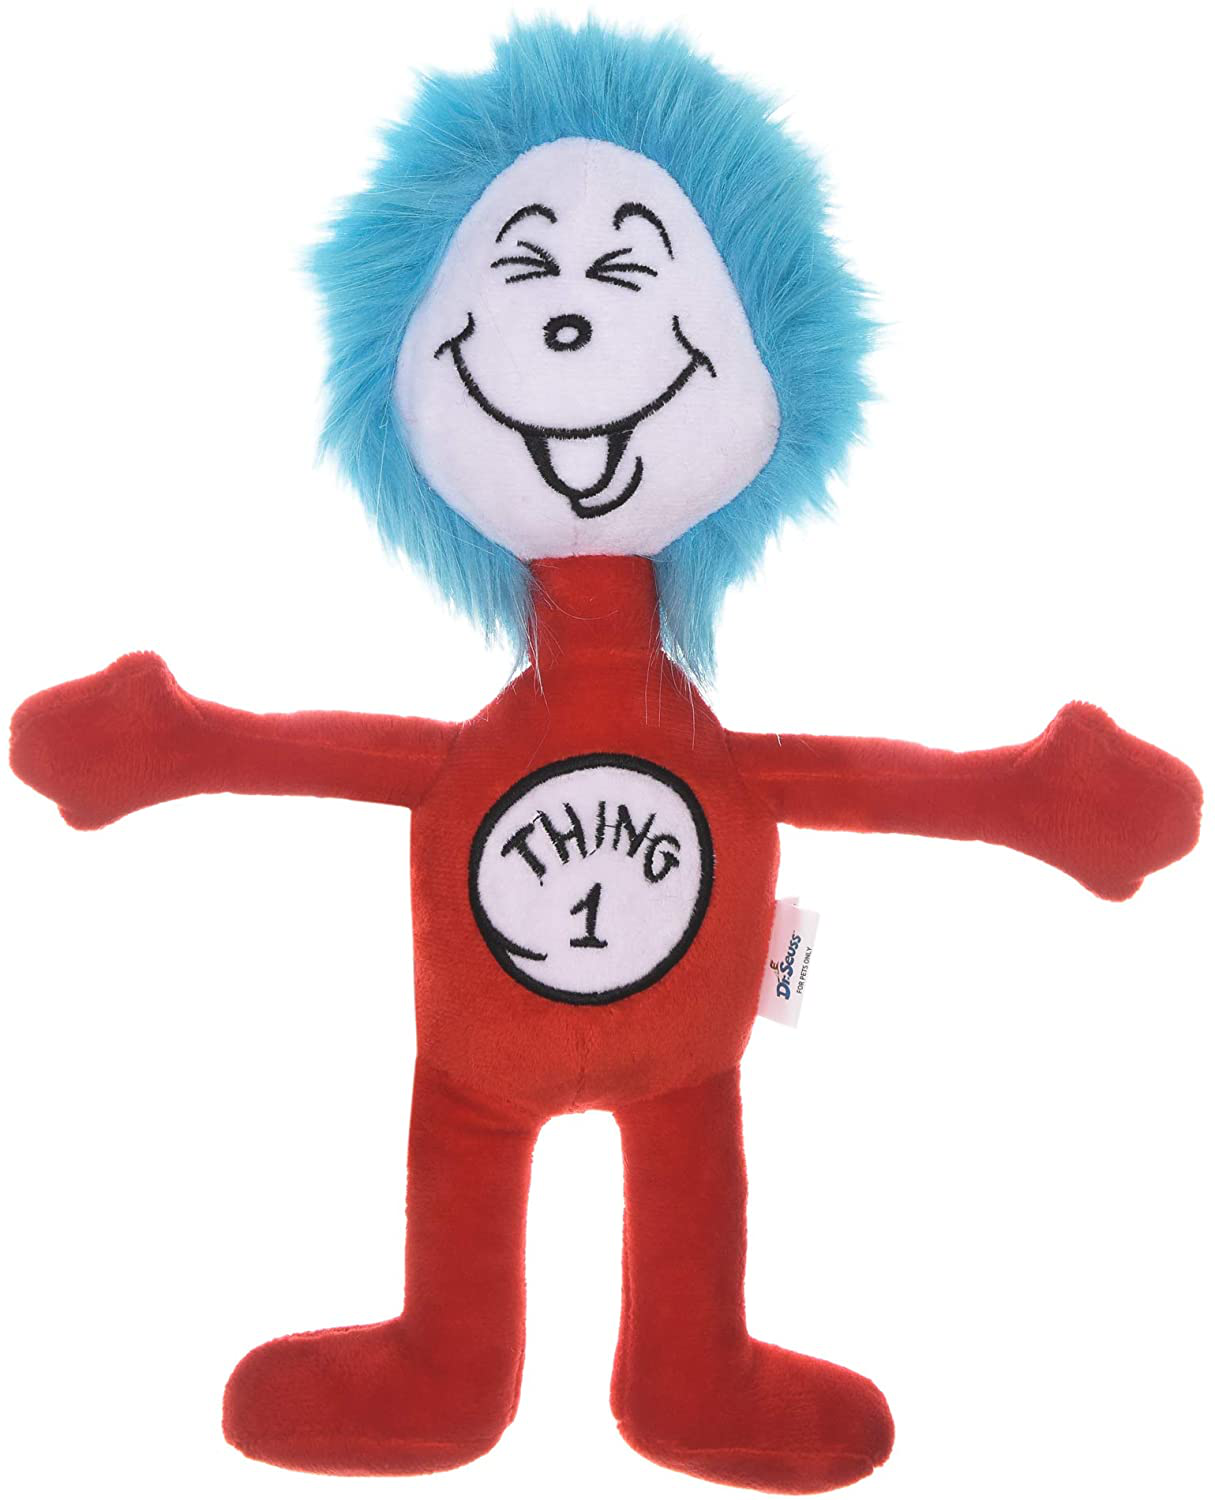 Dr. Seuss the Cat in the Hat Plush Dog Toys - Dog Toy for All Sized Dogs, the Cat in the Hat -Stuffed Animal Dog Toy from Dr. Seuss Collection Available in Multiple Styles Animals & Pet Supplies > Pet Supplies > Dog Supplies > Dog Toys Dr. Seuss for Pets Thing 1 Plush Figure 6 in 